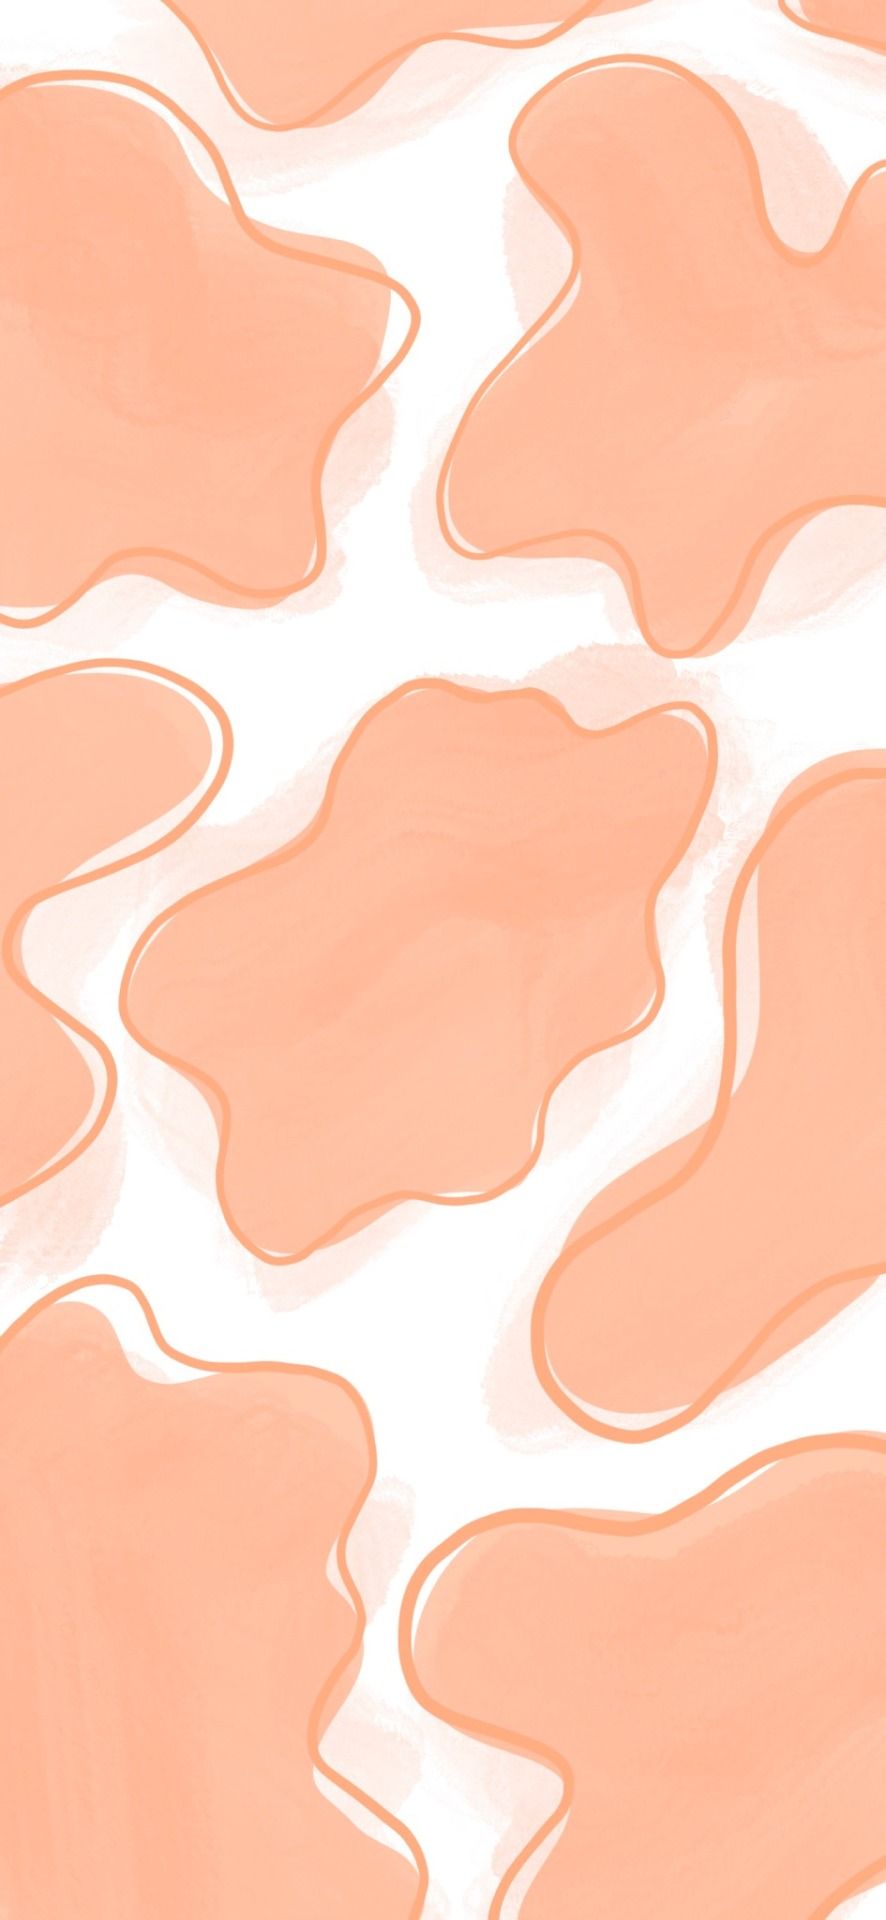 A pattern of orange and white shapes - Peach